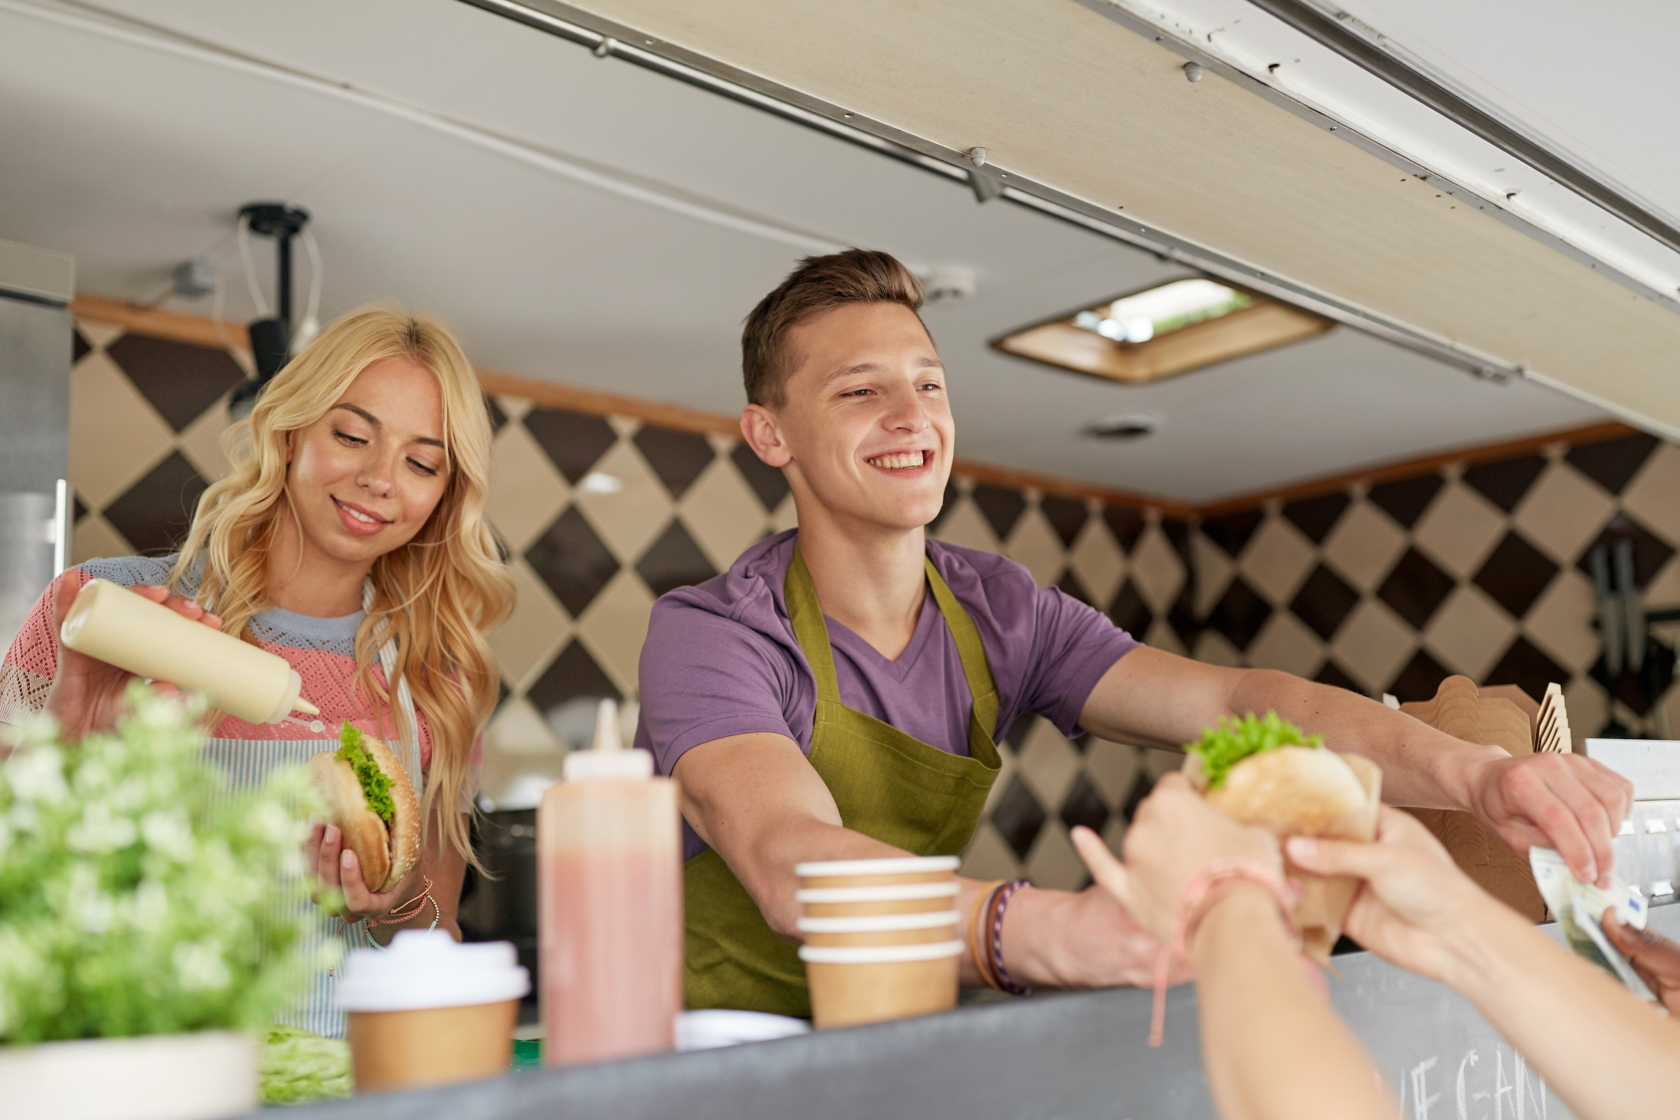 A woman and man in a food truck serve customers in Texas. If you are establishing a business in Texas, you will need to conduct a Texas business search with the Secretary of State to make sure your intended entity name isn't already being used.